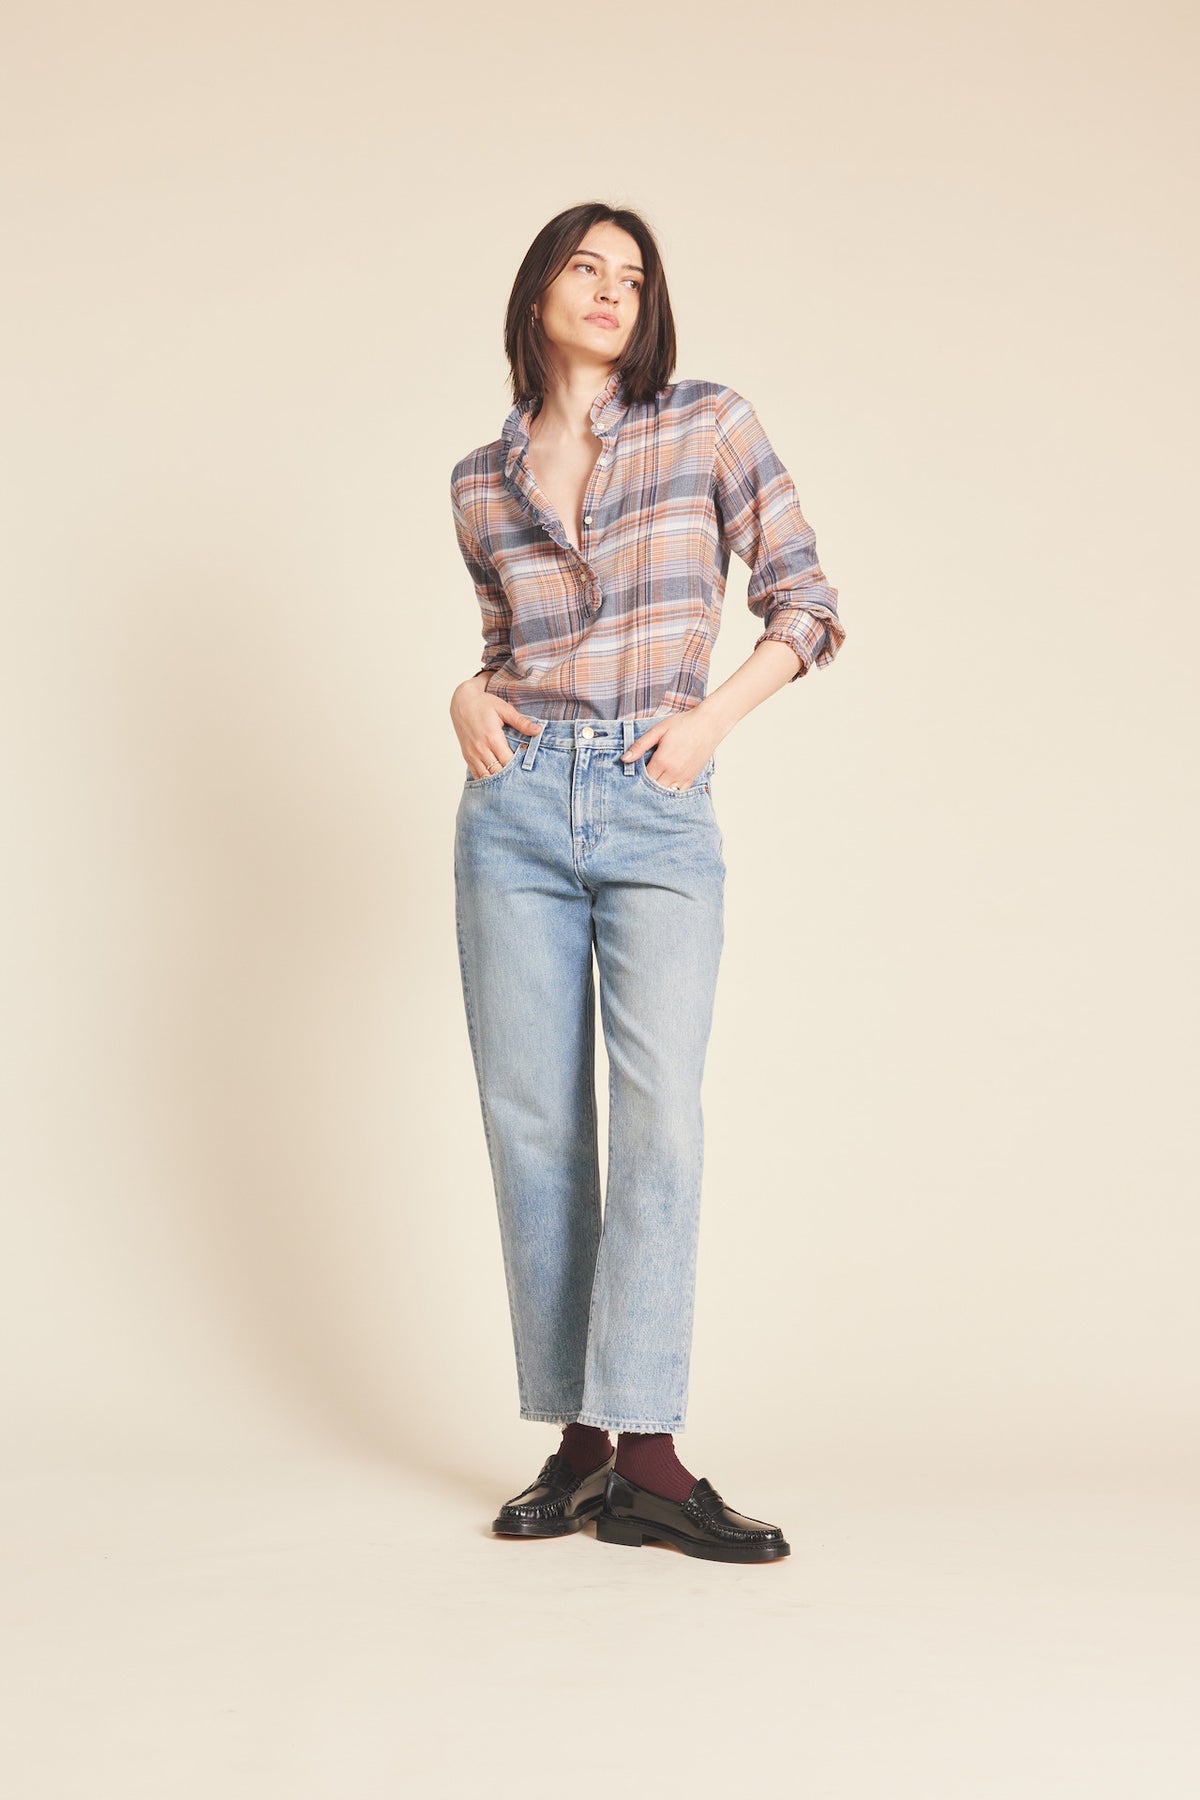 Birds of Paradis by Trovata Breezy Blouse in Eclipse Plaid